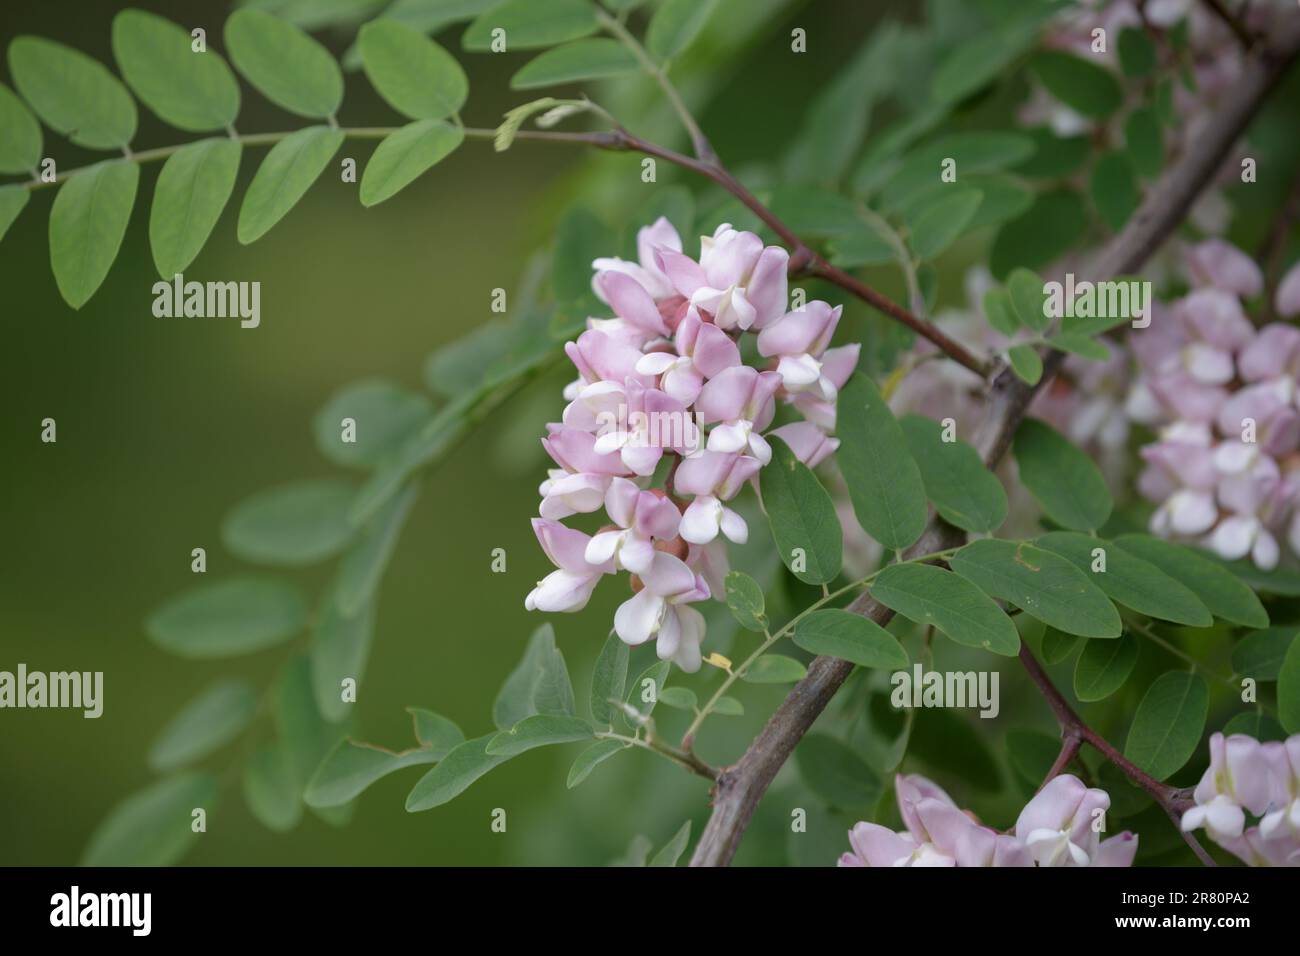 Robinia hispida. Branch with leaves and flowers of Rose-acacia. Bunches of pink flowers of Moss locust in full bloom Stock Photo